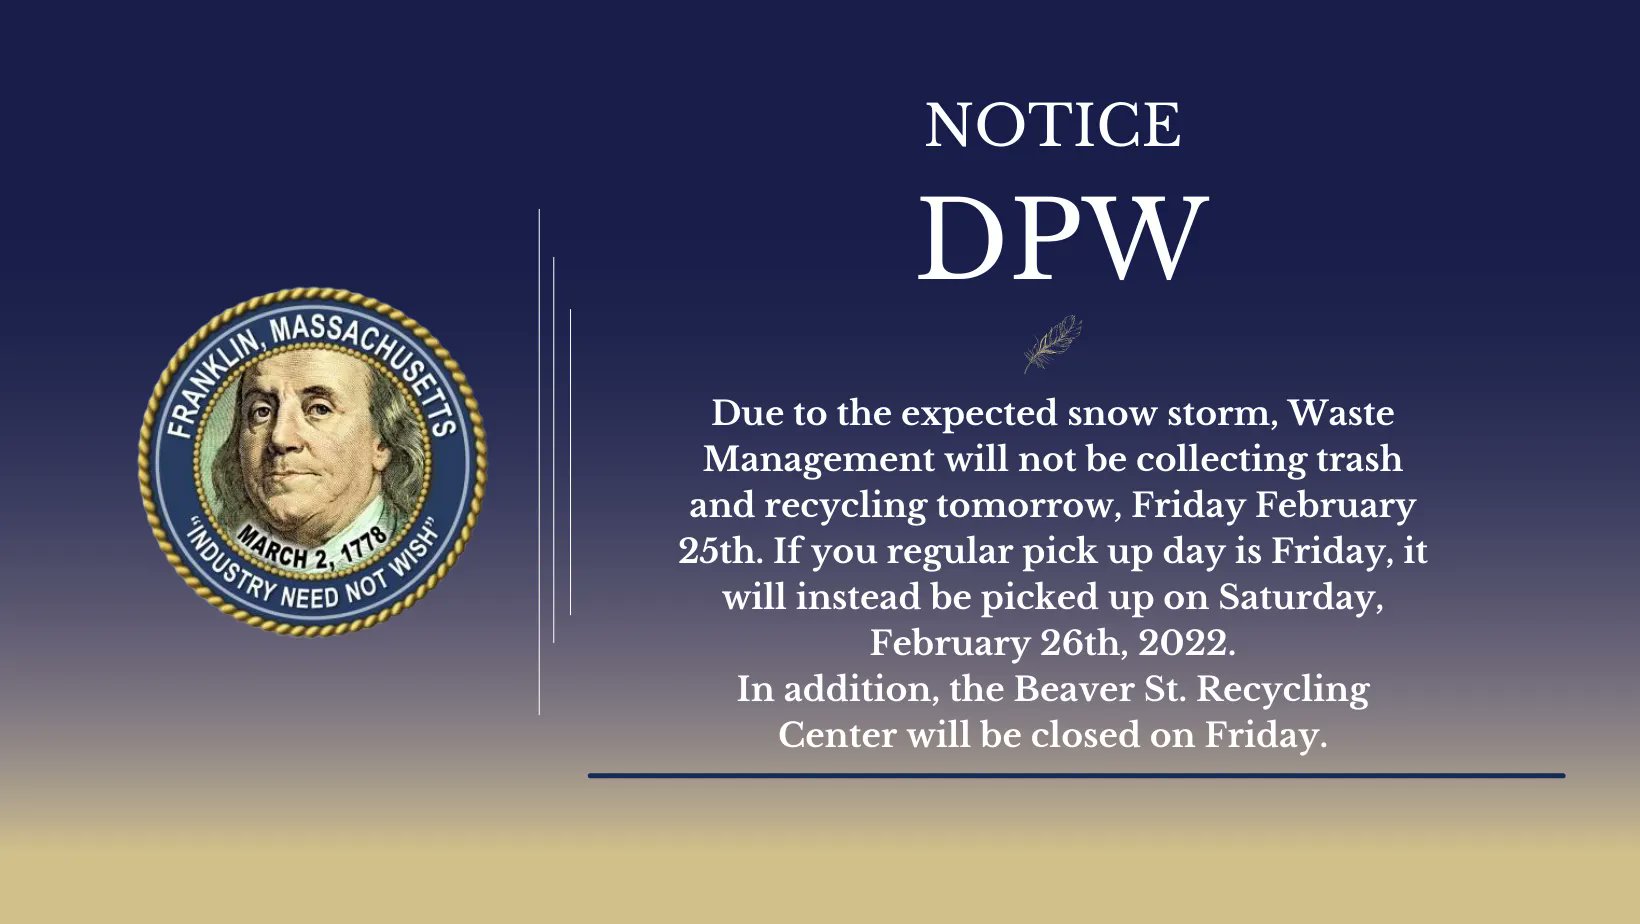 Town of Franklin: DPW Recorded Message with the storm notices for Feb 25, 2022